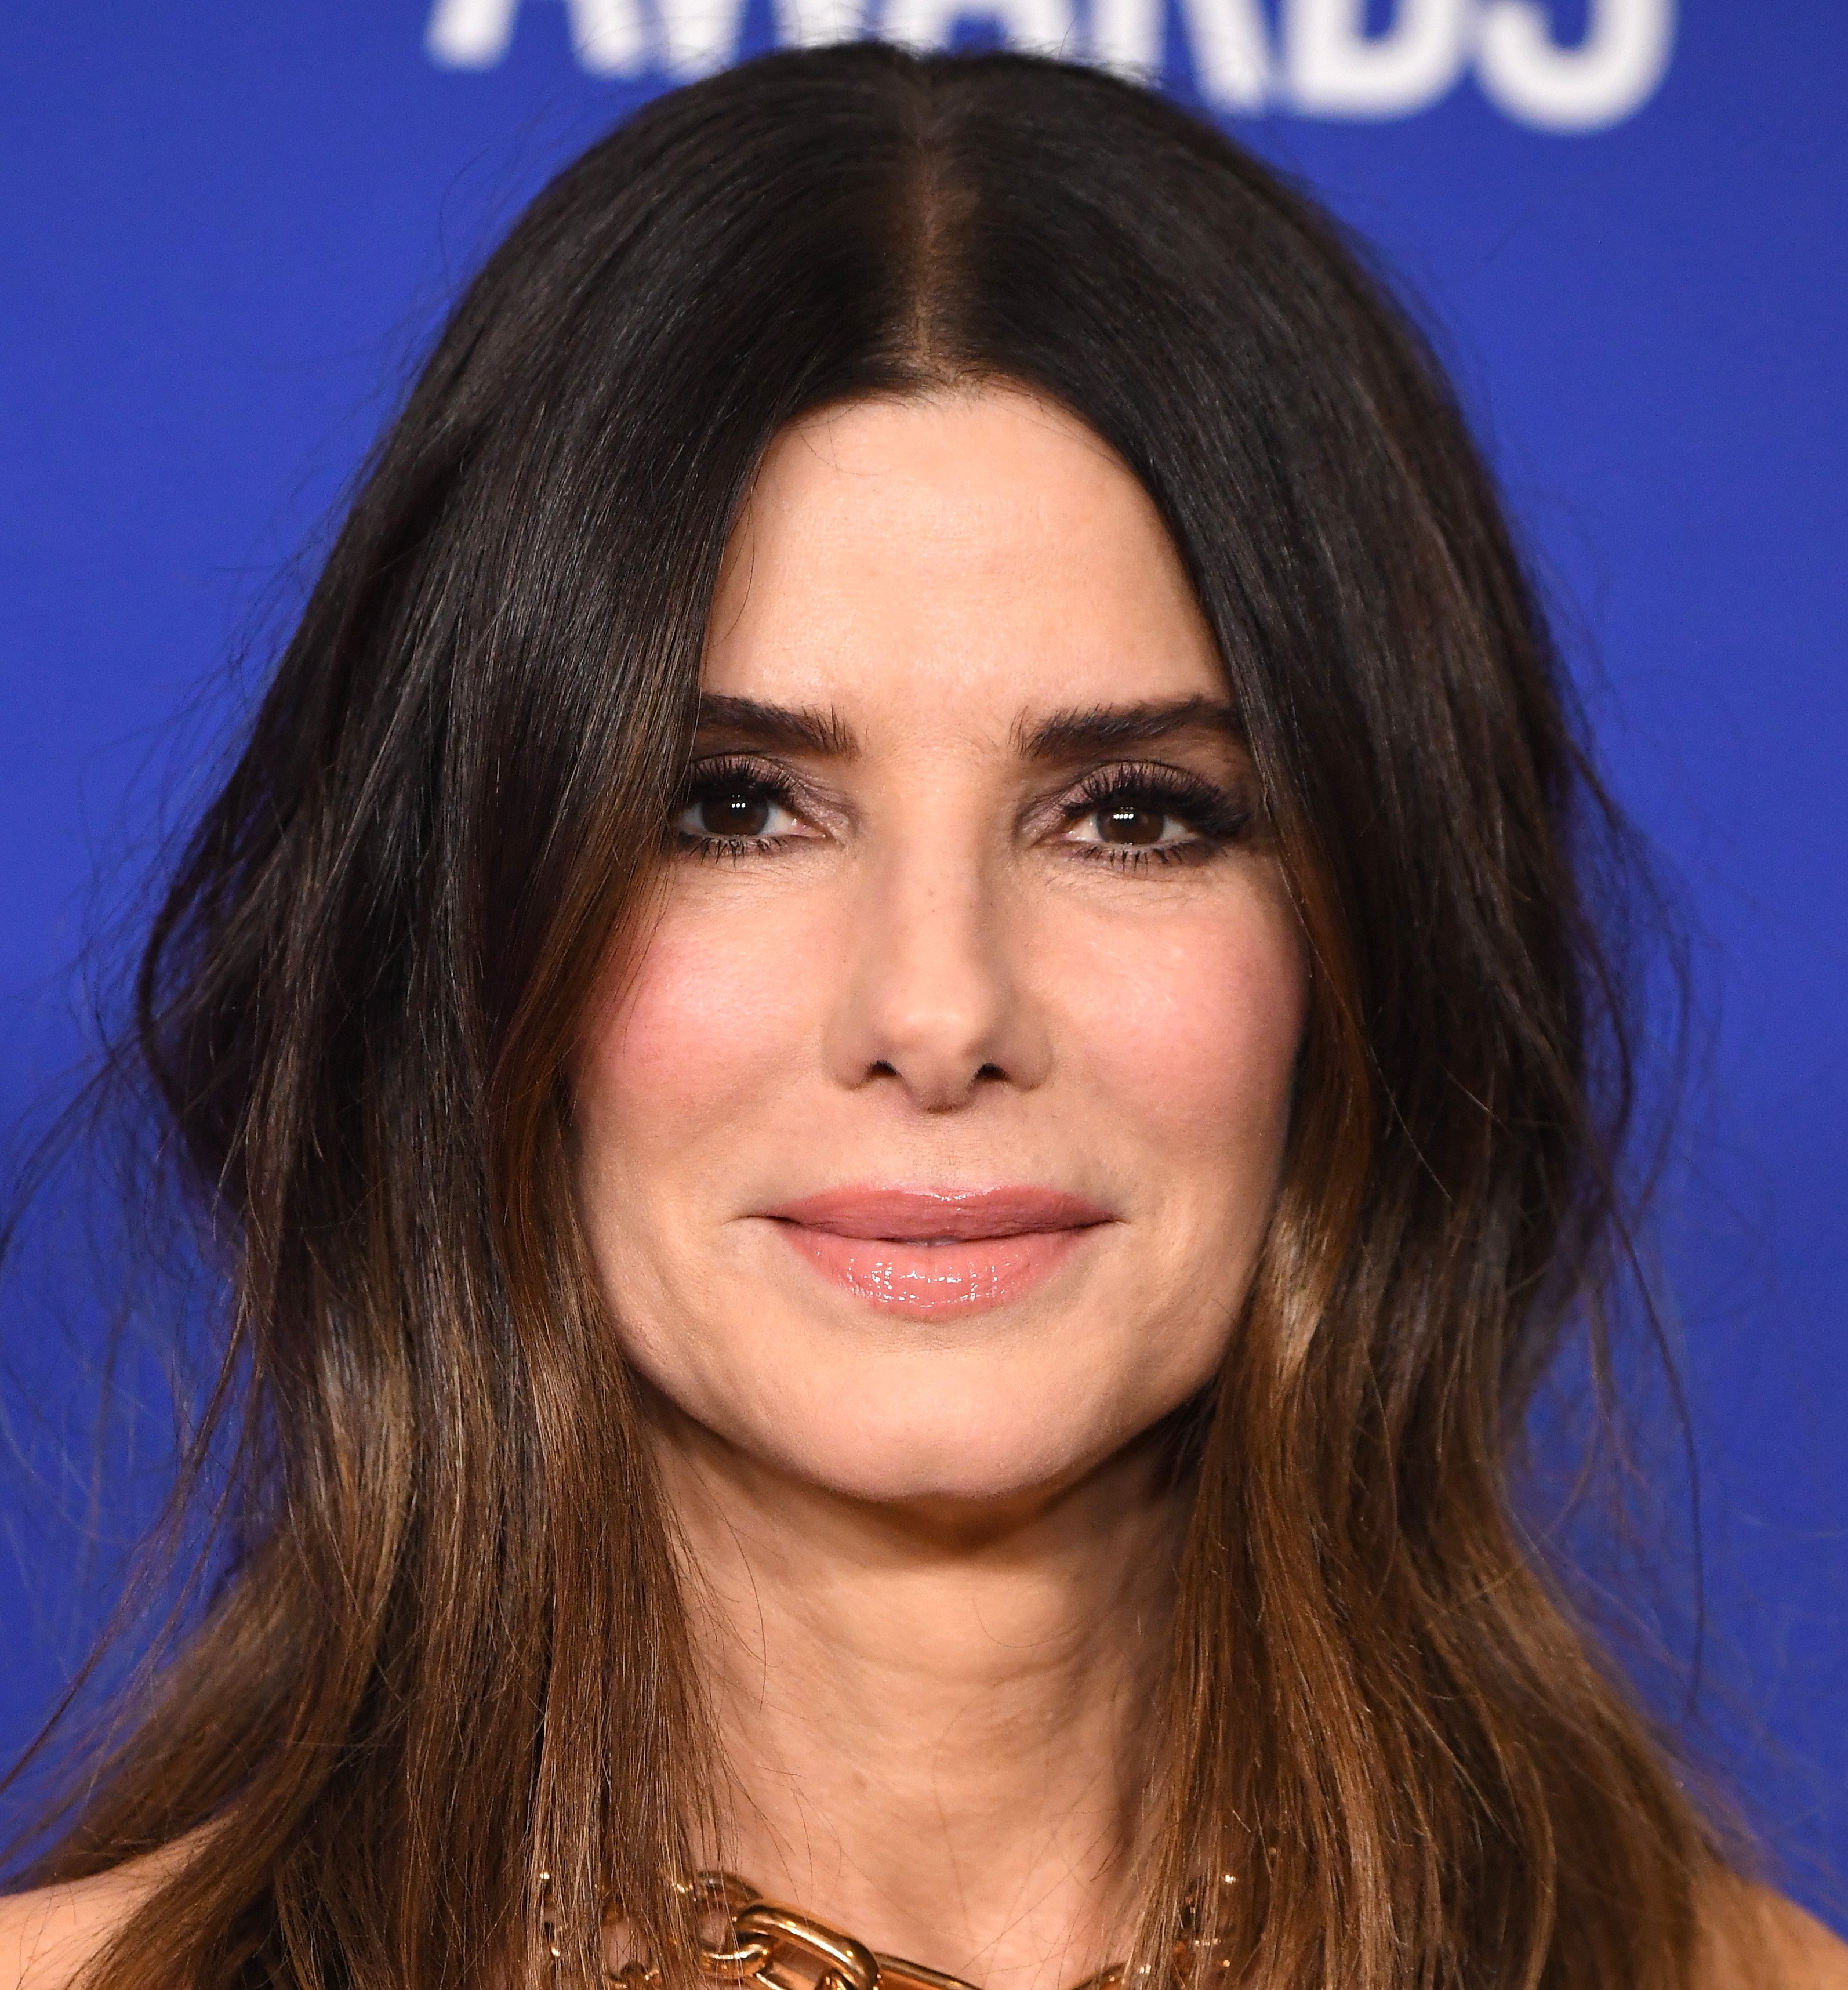 Actress Sandra Bullock posing in the press room at the 77th Annual Golden Globe Awards at The Beverly Hilton Hotel on January 05, 2020 in Beverly Hills, California. | Source: Getty Images